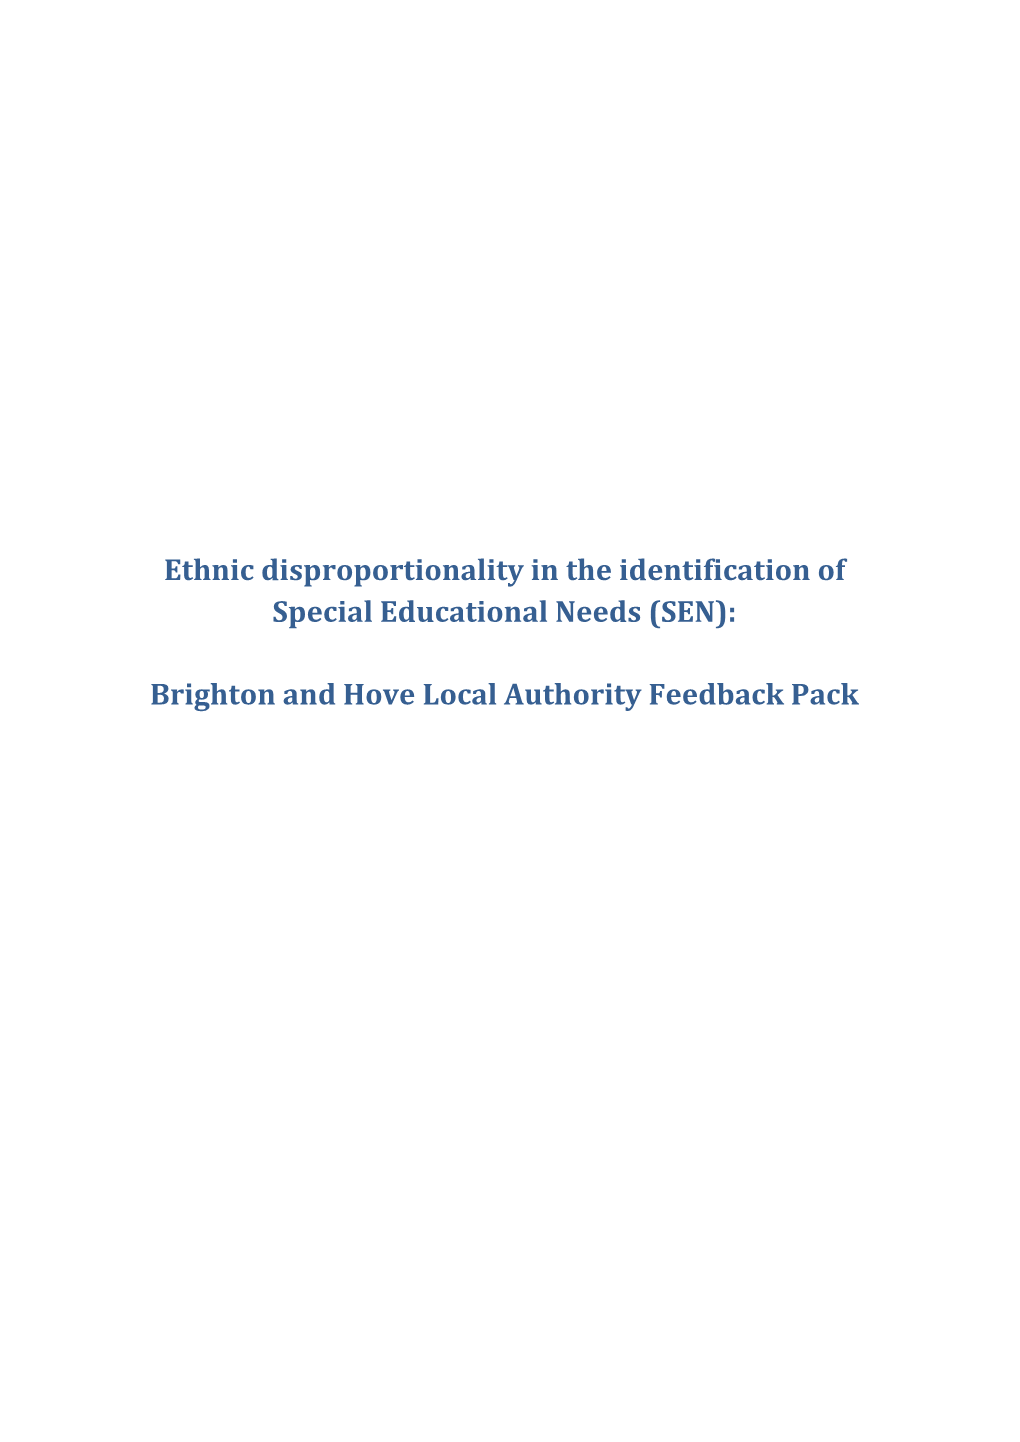 Brighton and Hove Local Authority Feedback Pack